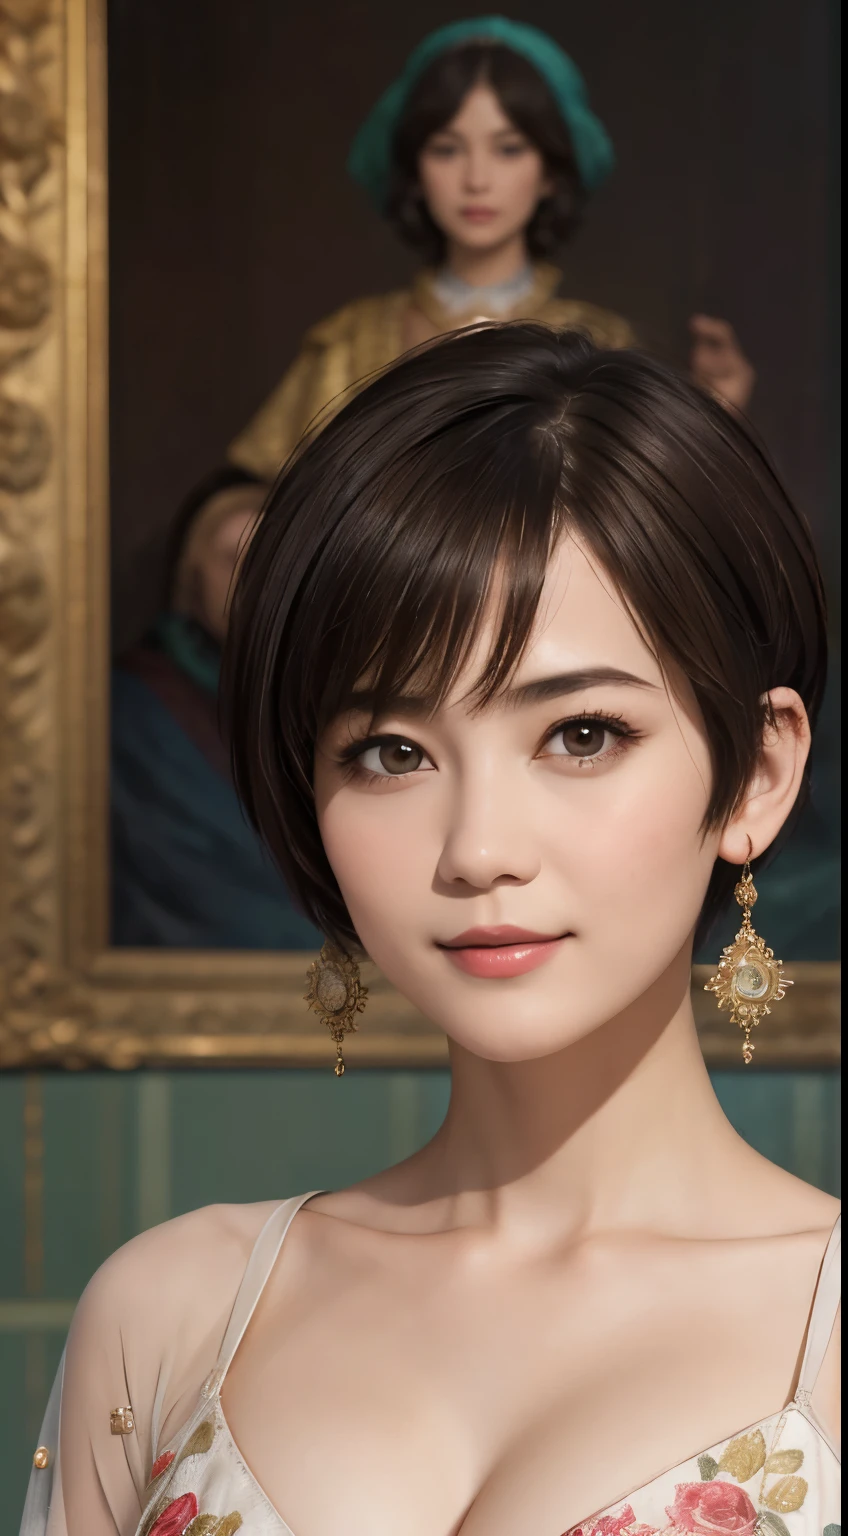 140
(a 20 yo woman,in the palace), (A hyper-realistic), (high-level image quality), ((beautiful hairstyle 46)), ((short-hair:1.46)), (kindly smile), (breasted:1.46), (lipsticks), (is wearing dress), (murky,wide,Luxurious room), (florals), (an oil painting、Rembrandt)